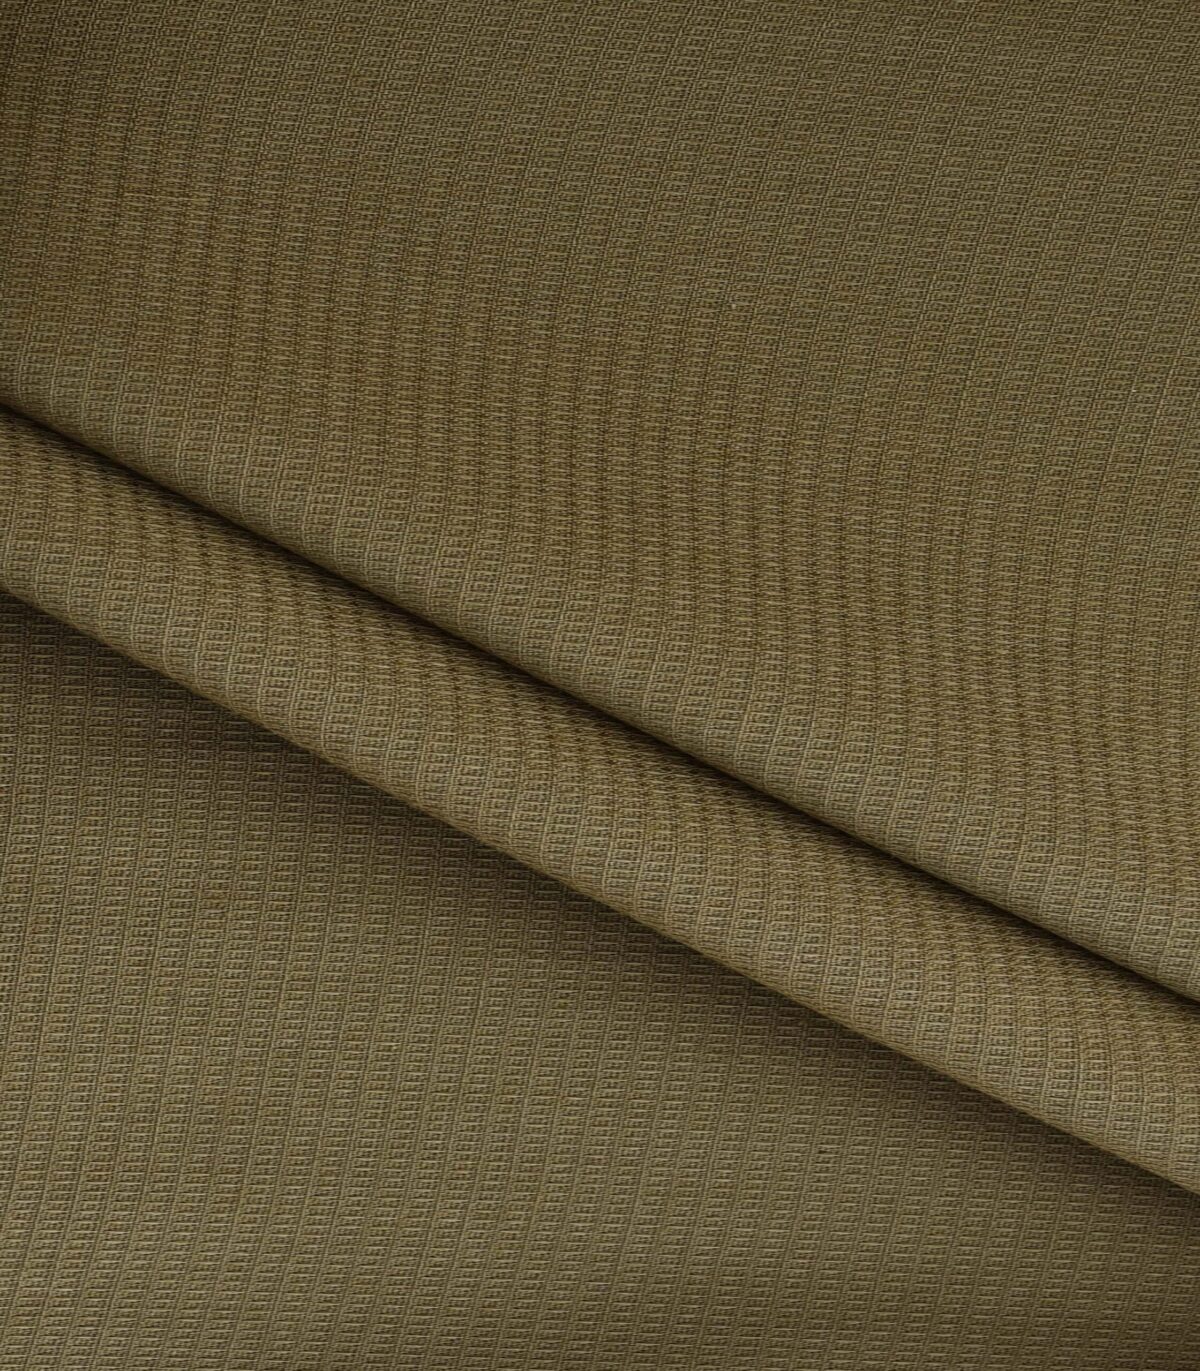 Cotton Olive Dyed honey comb Fabric